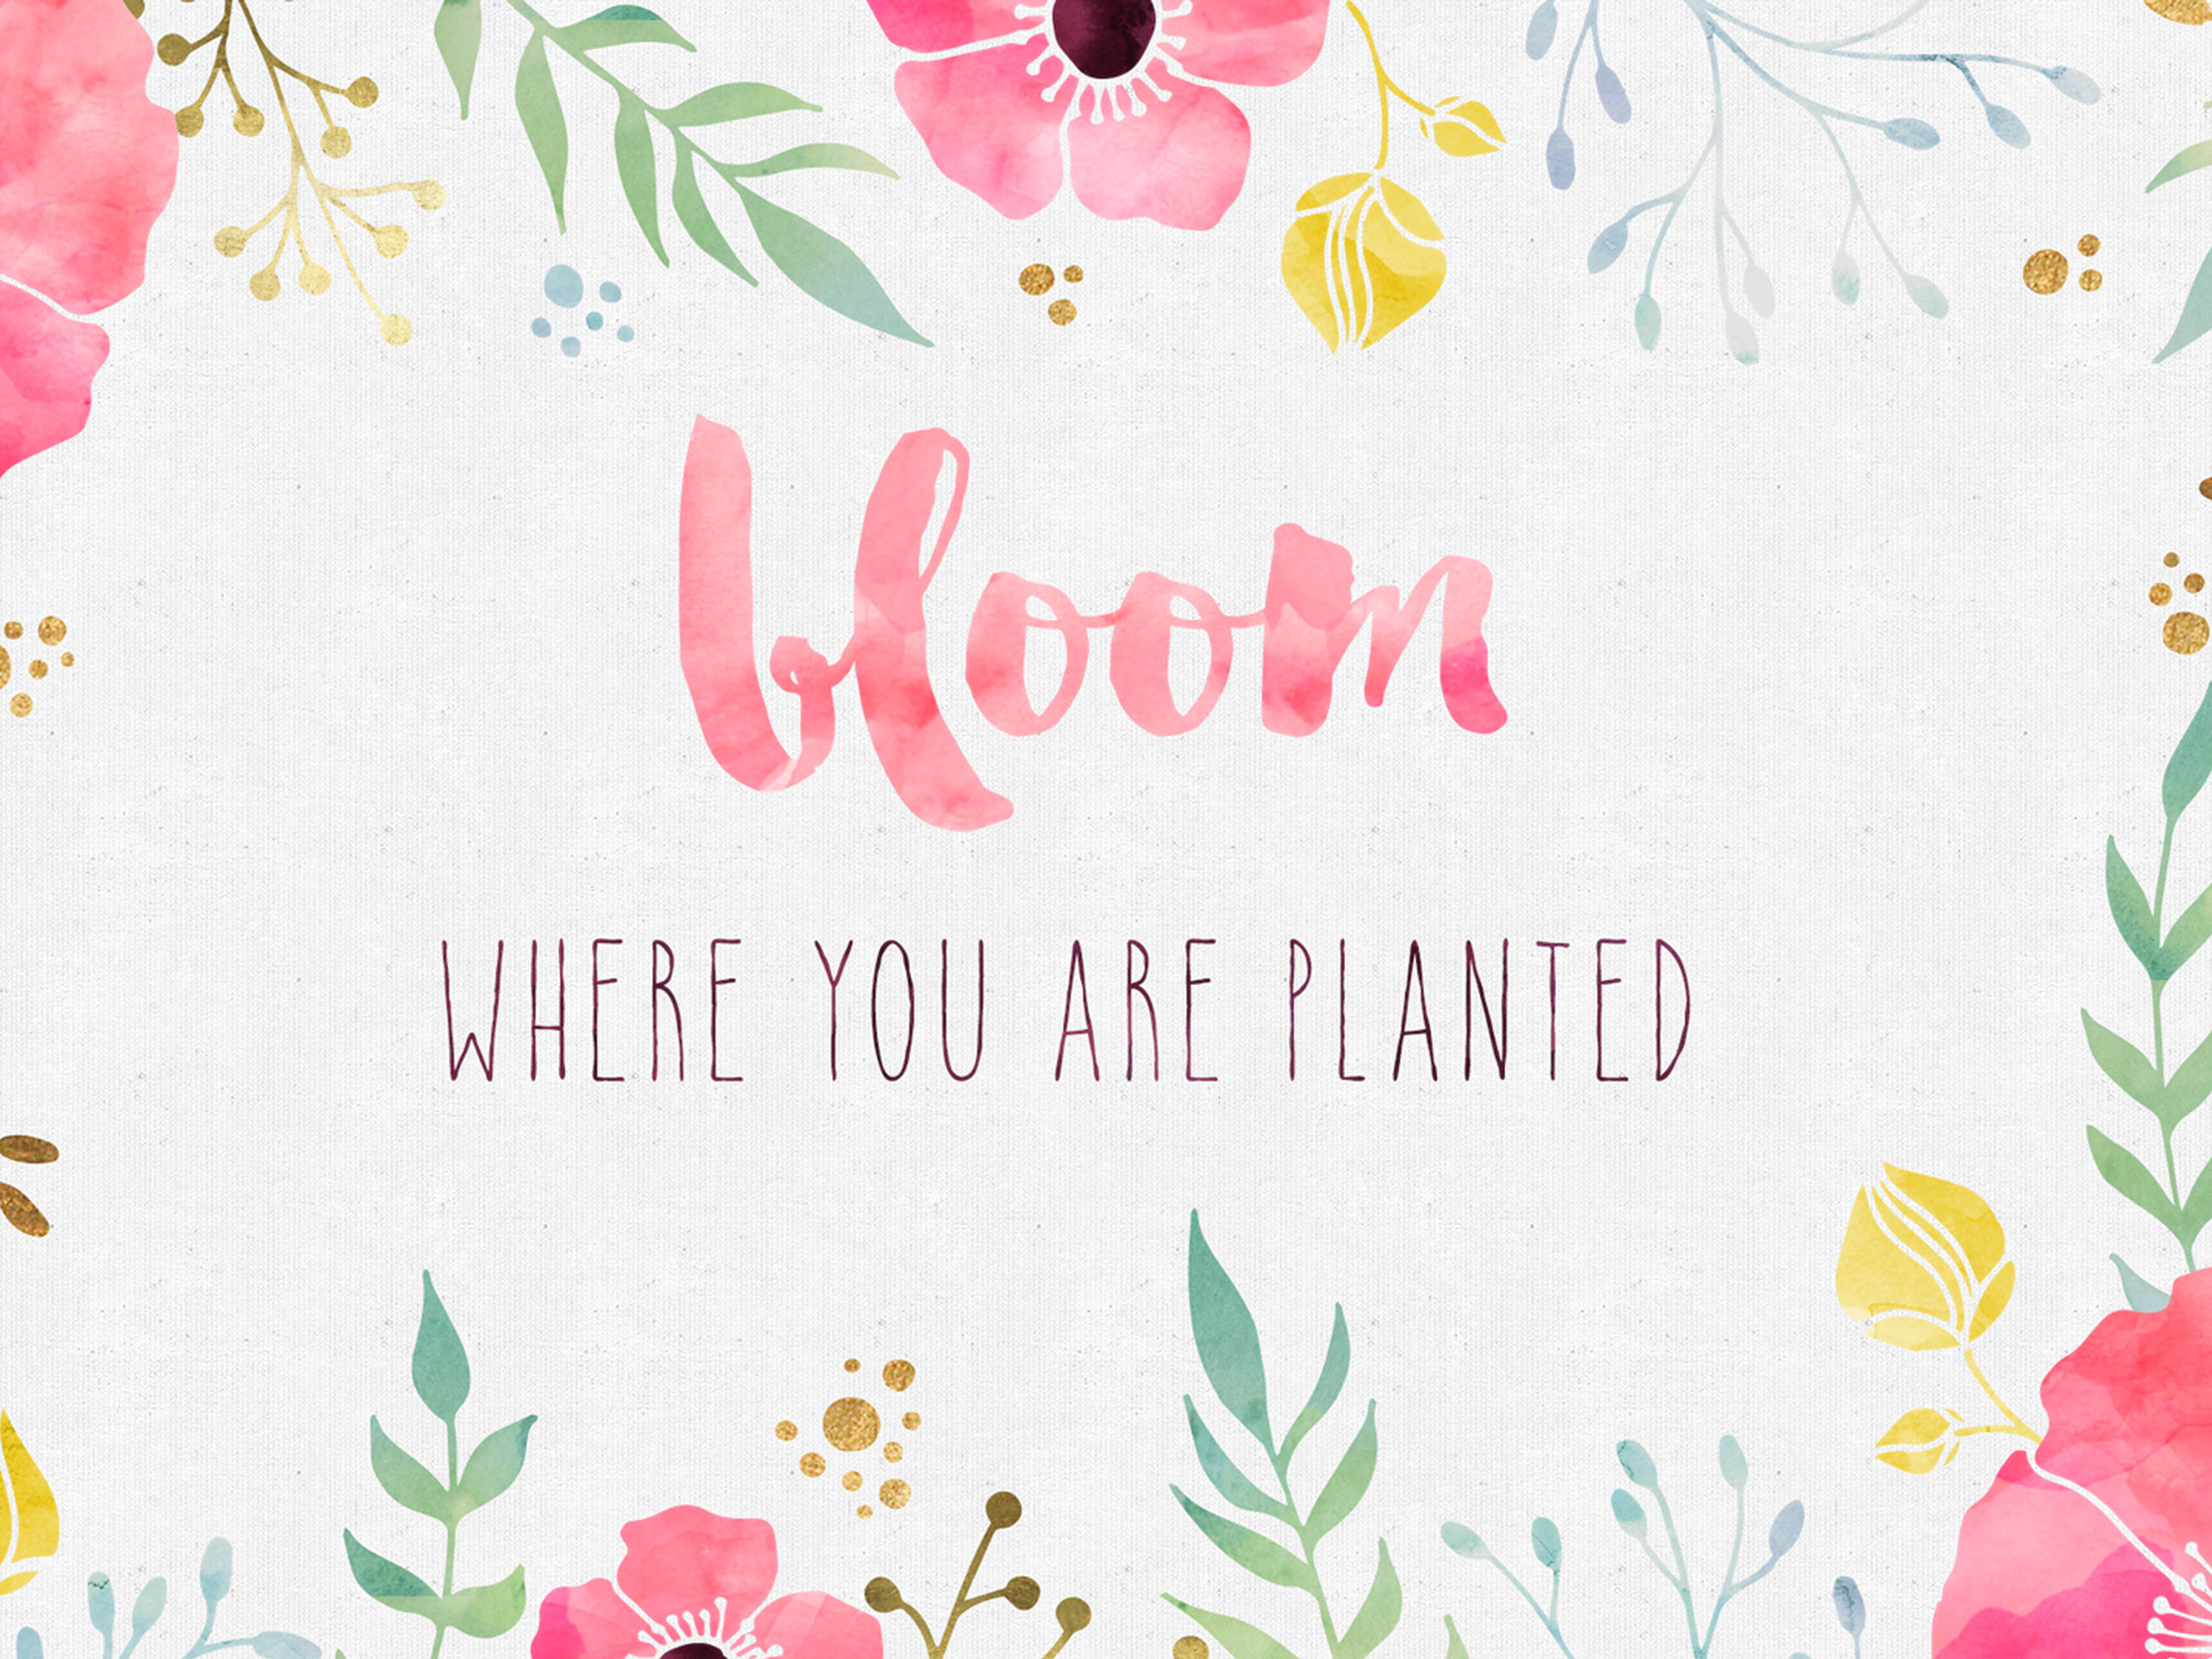 2560x1920 Free Desktop Wallpaper - Bloom Where you are Planted